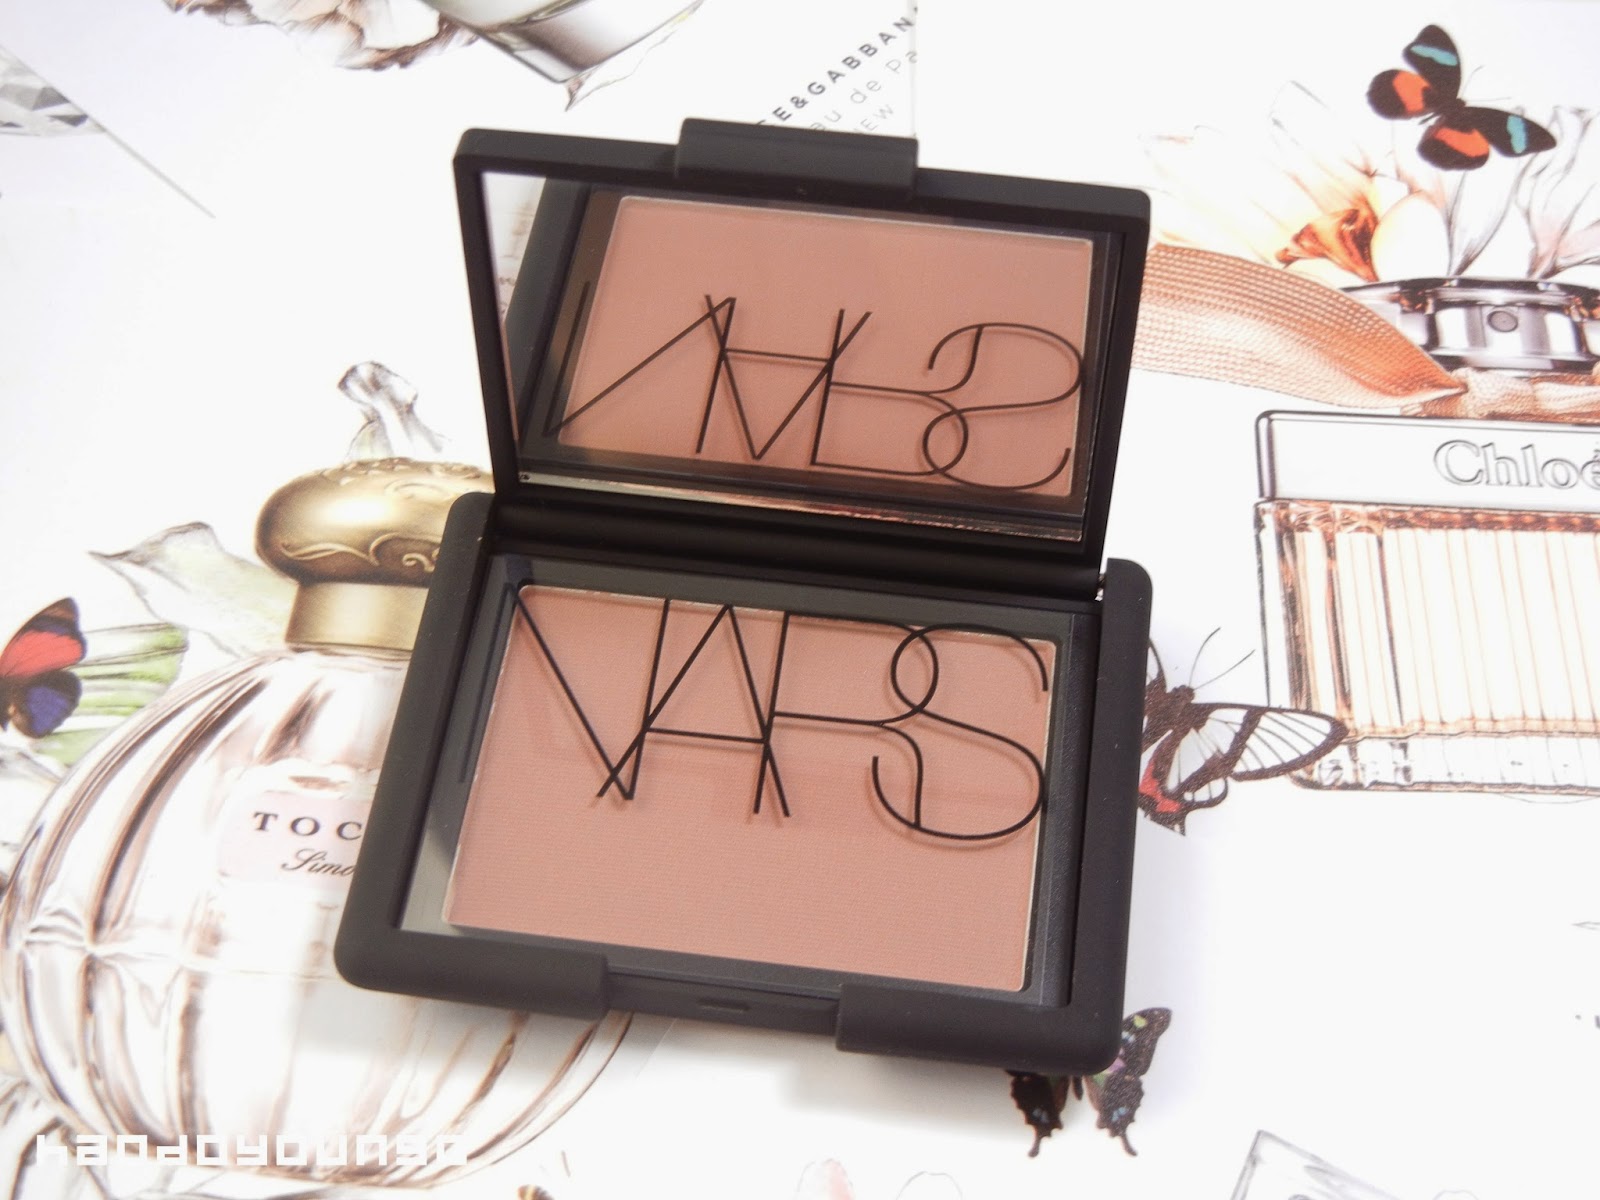 Review & Swatches: NARS Blush in Douceur.